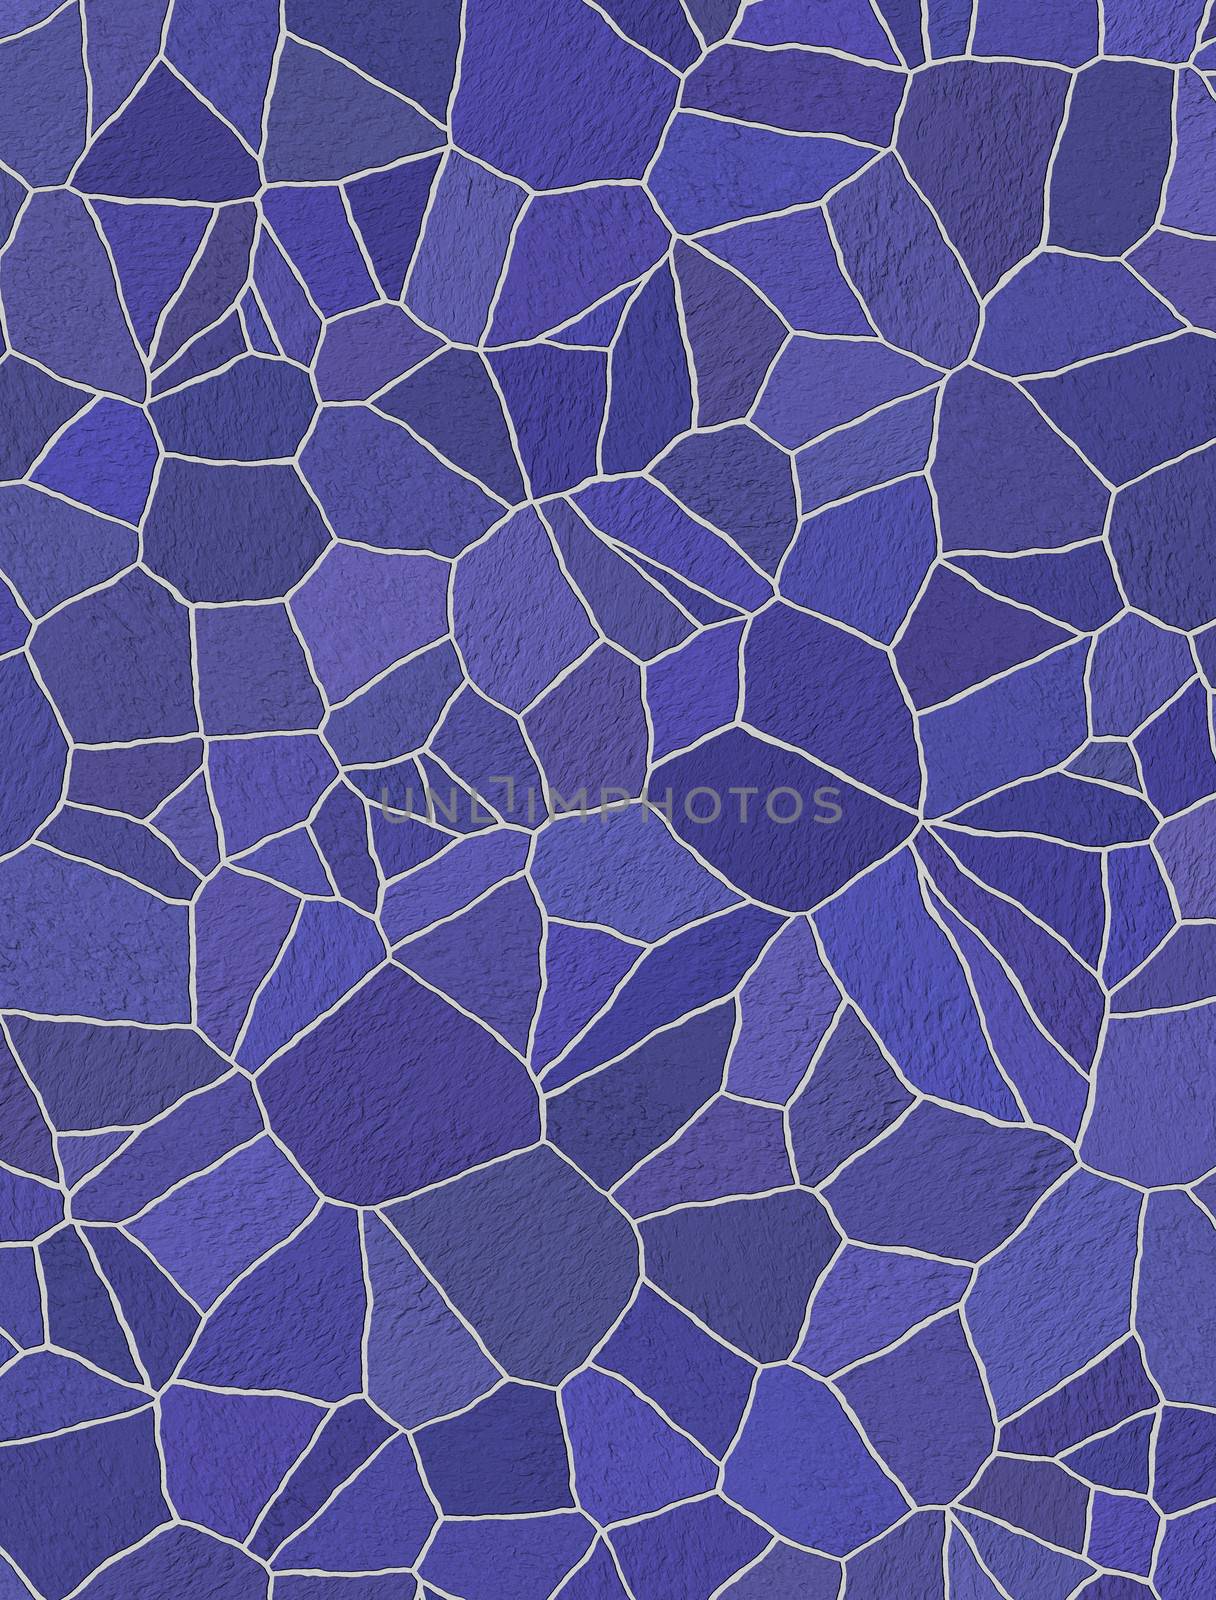 blue and purple rustic mosaic tile pattern by sfinks